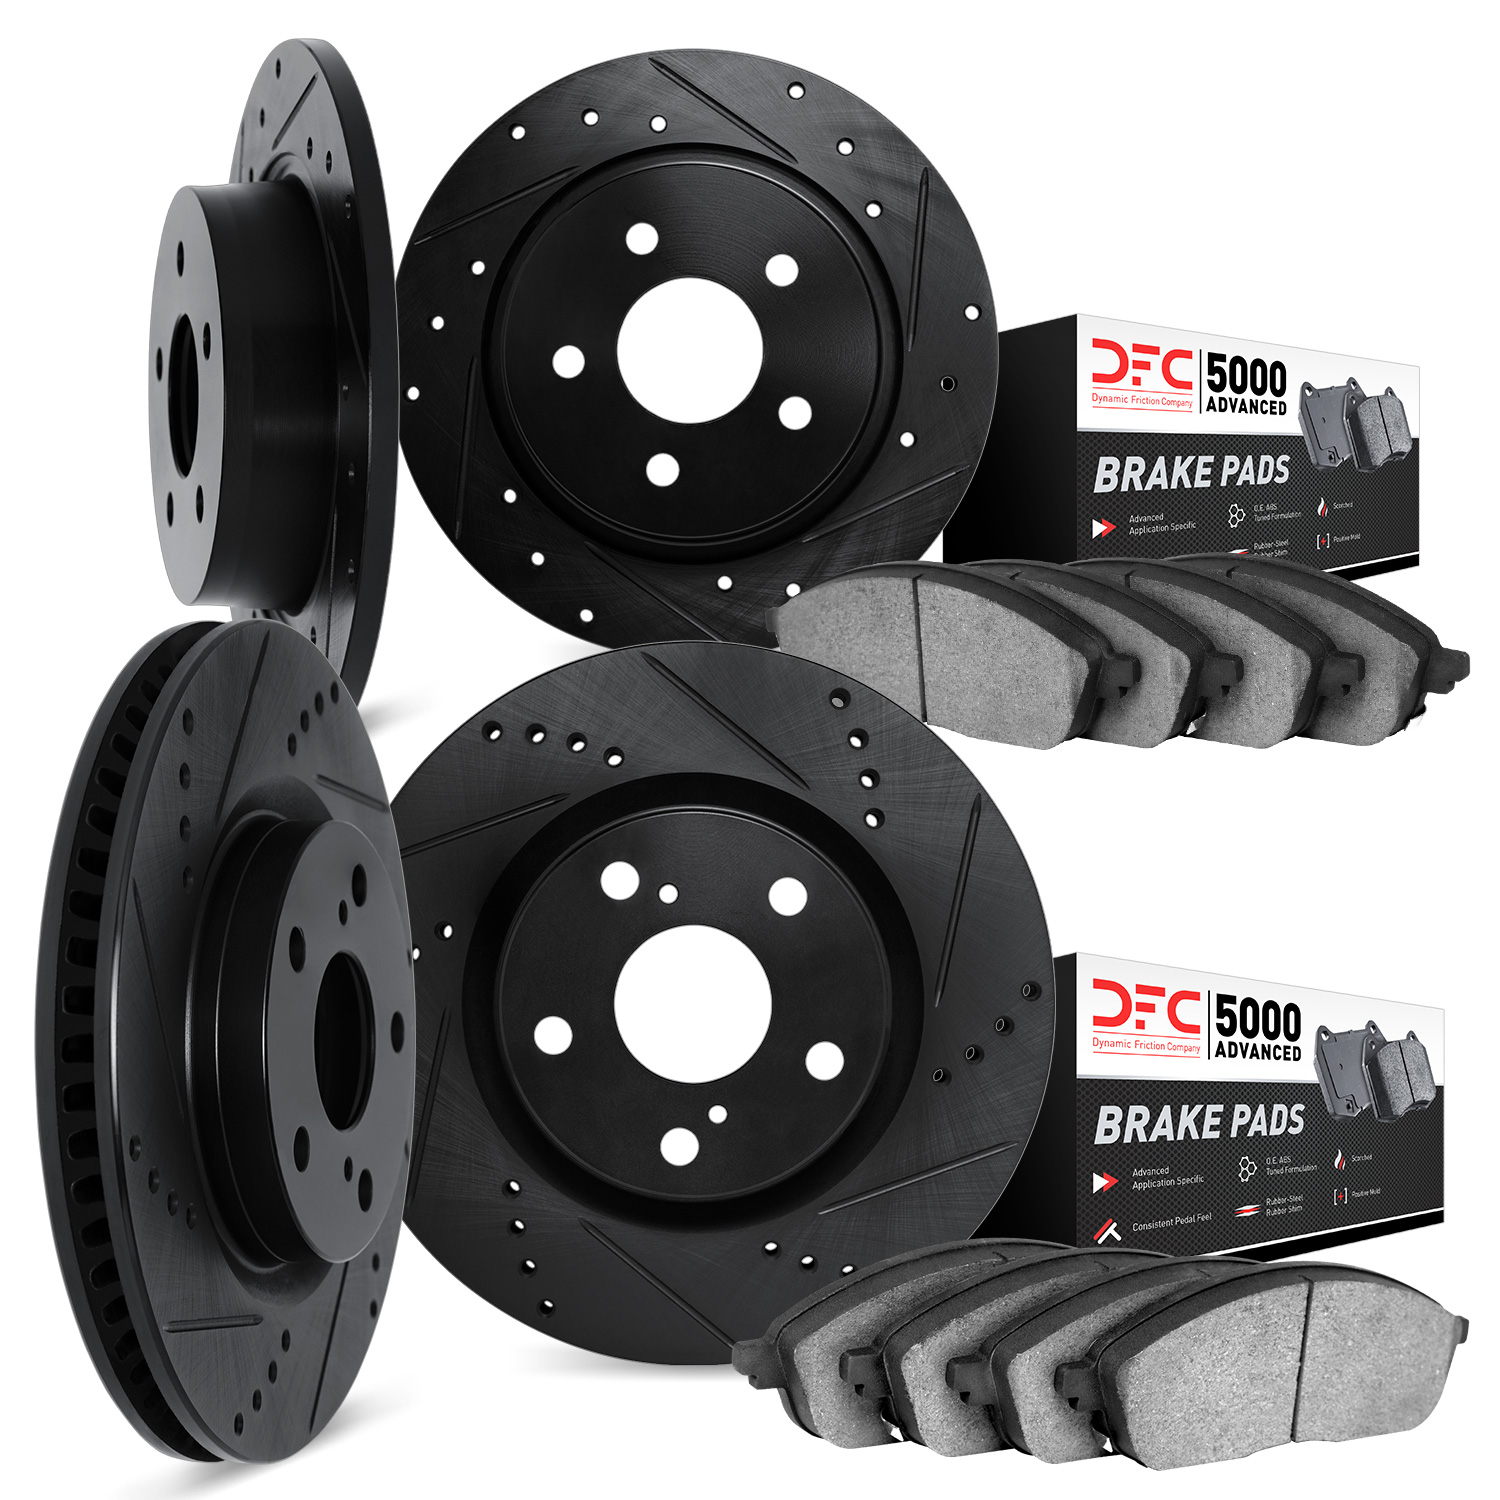 8504-47247 Drilled/Slotted Brake Rotors w/5000 Advanced Brake Pads Kit [Black], 1992-1993 GM, Position: Front and Rear